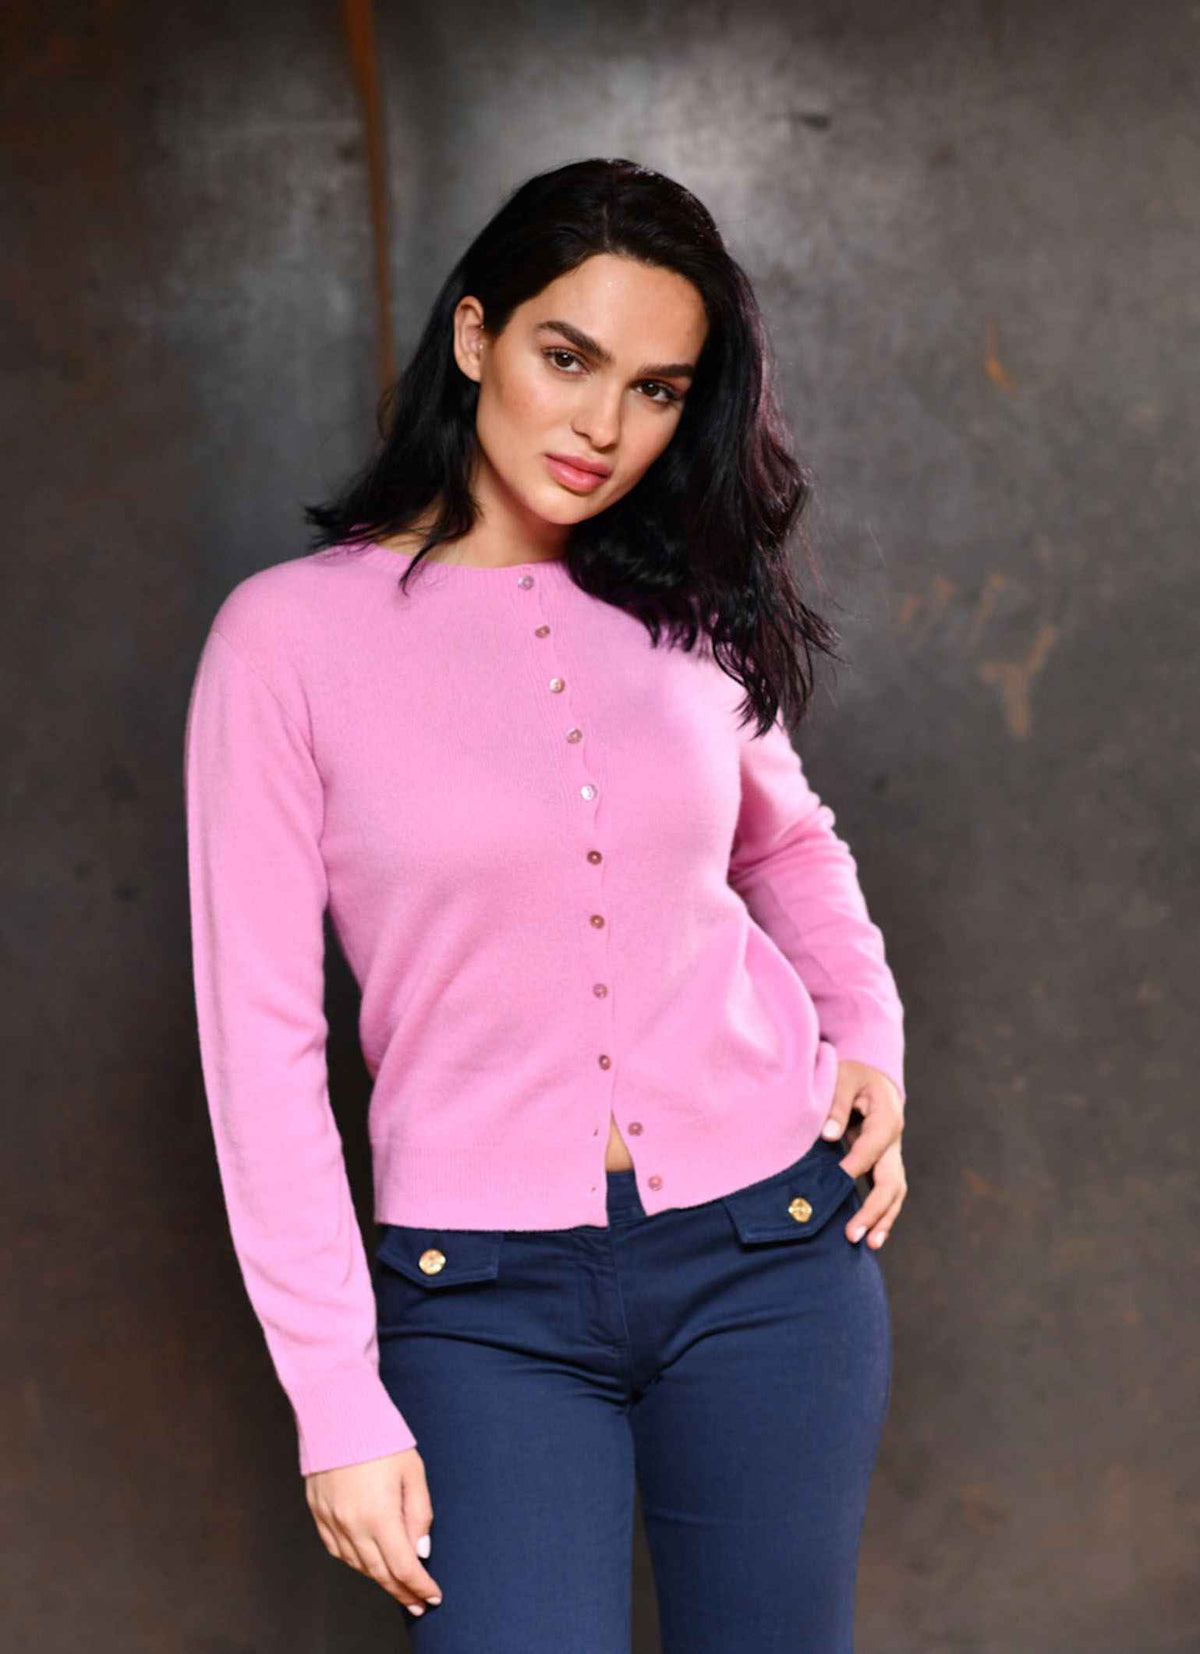 Women wearing Campiglio soft Italian cashmere cardigan in color pink